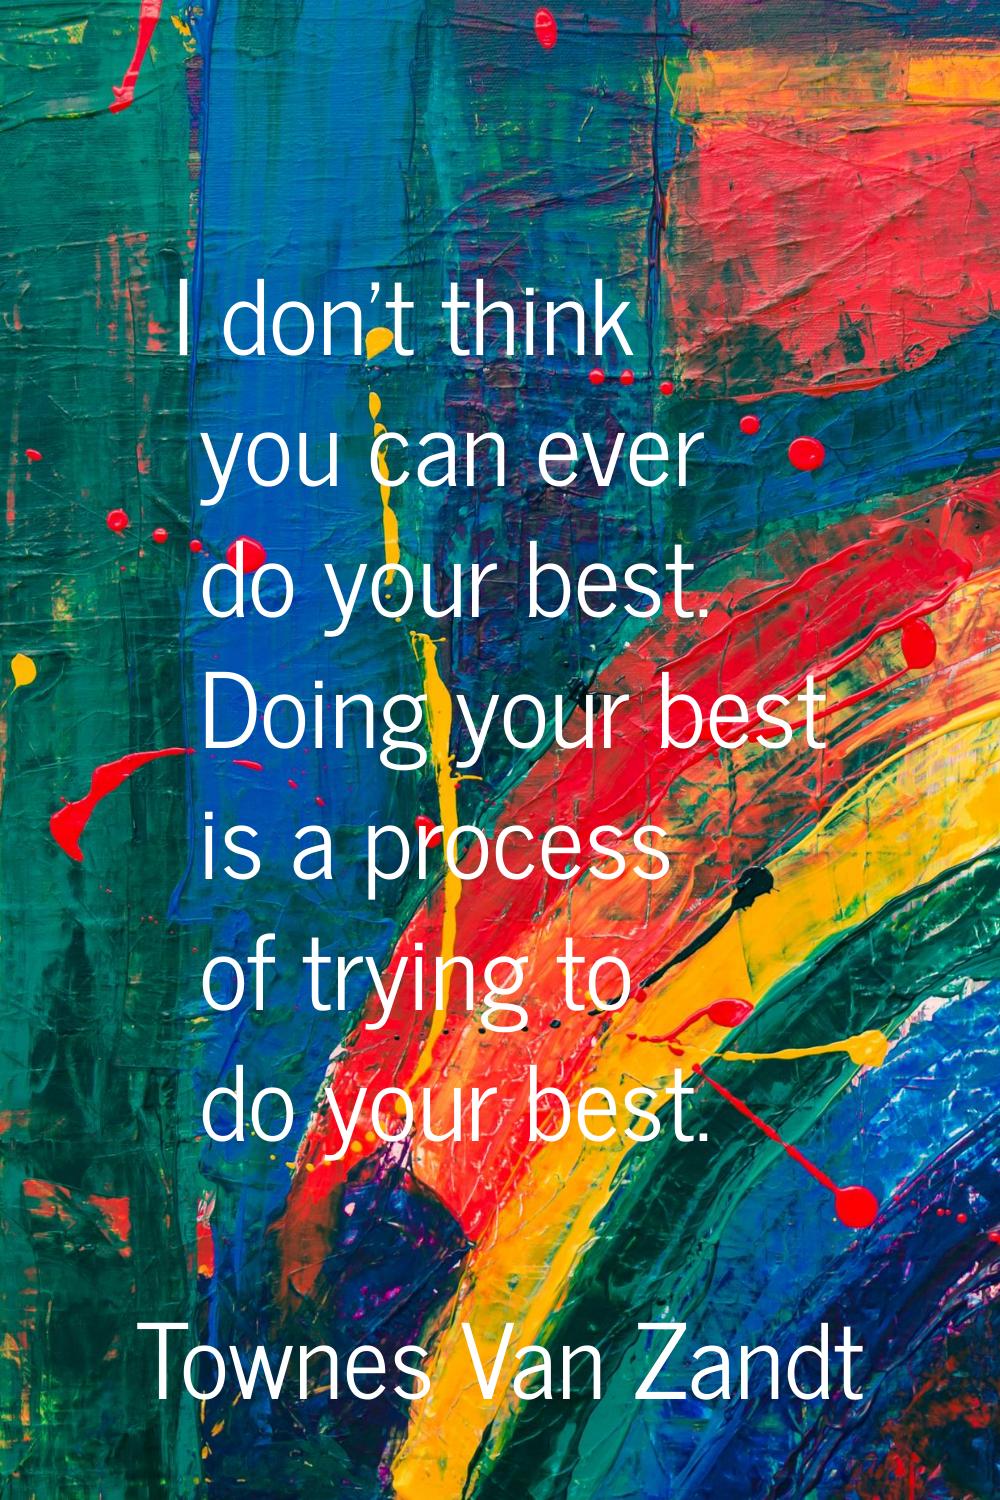 I don't think you can ever do your best. Doing your best is a process of trying to do your best.